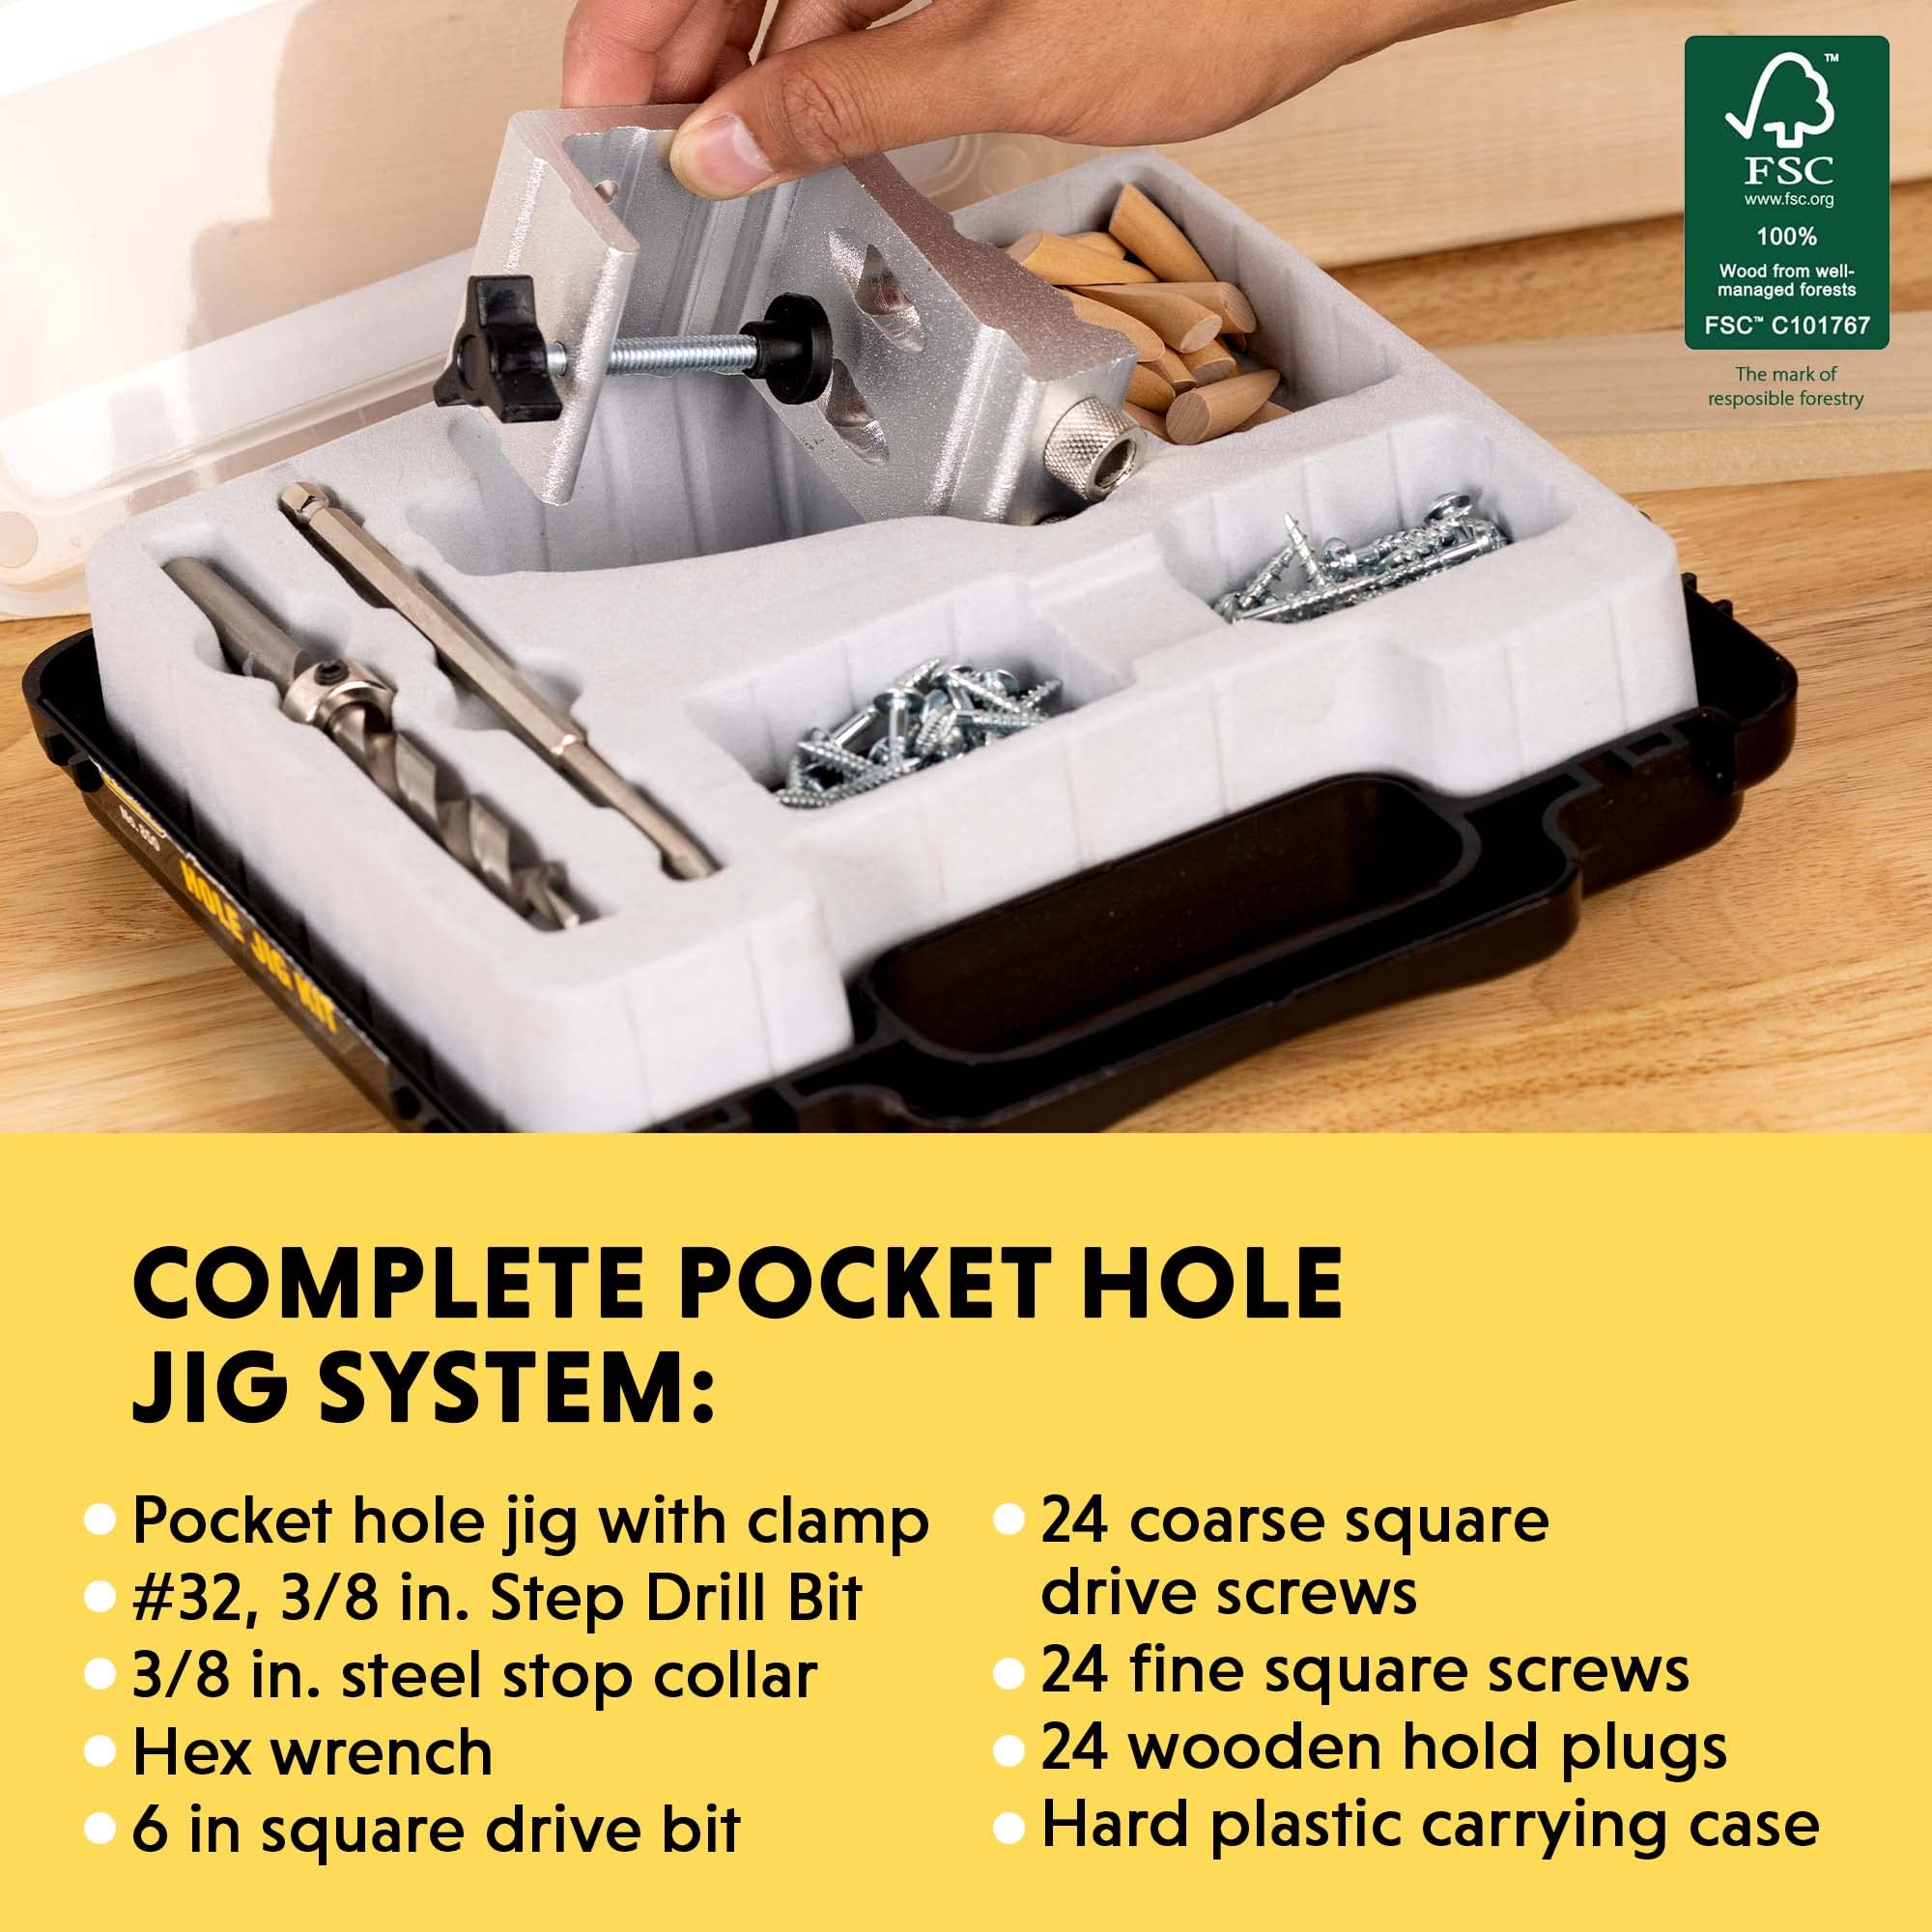 General Tools Woodworking Pocket Hole Jig Kit #850 - All-In-One Aluminum Pocket System with Carrying Case